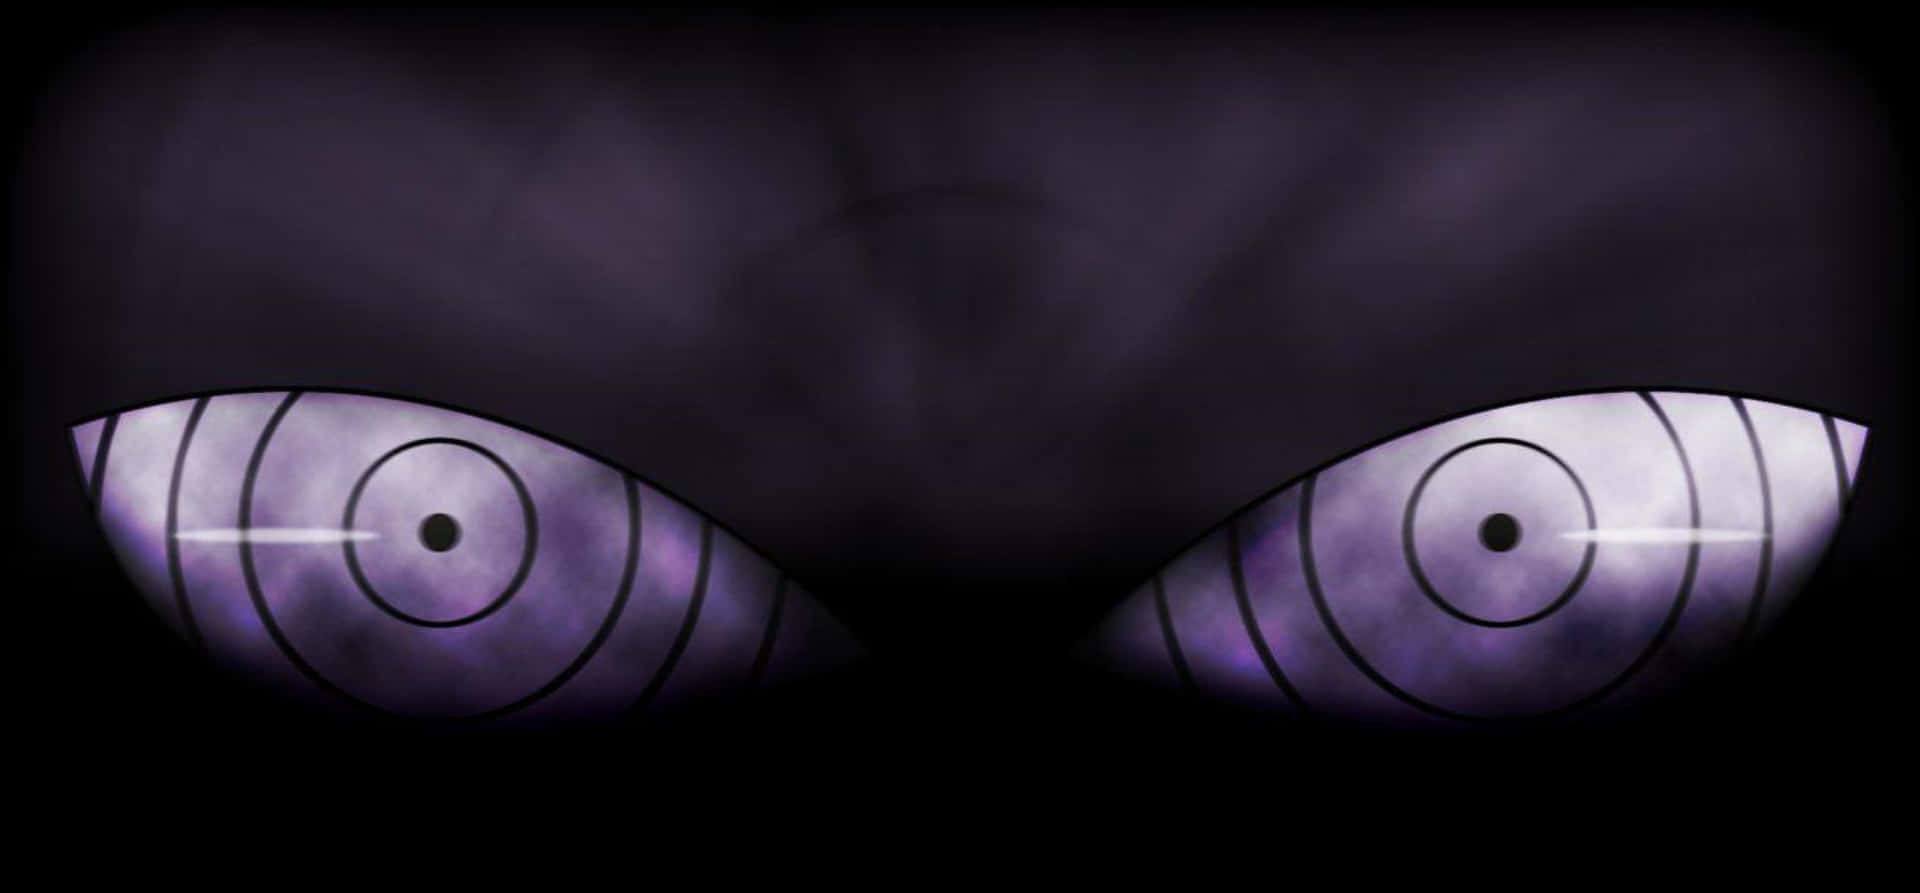 Lord Pain From The Rinnegan Wallpaper